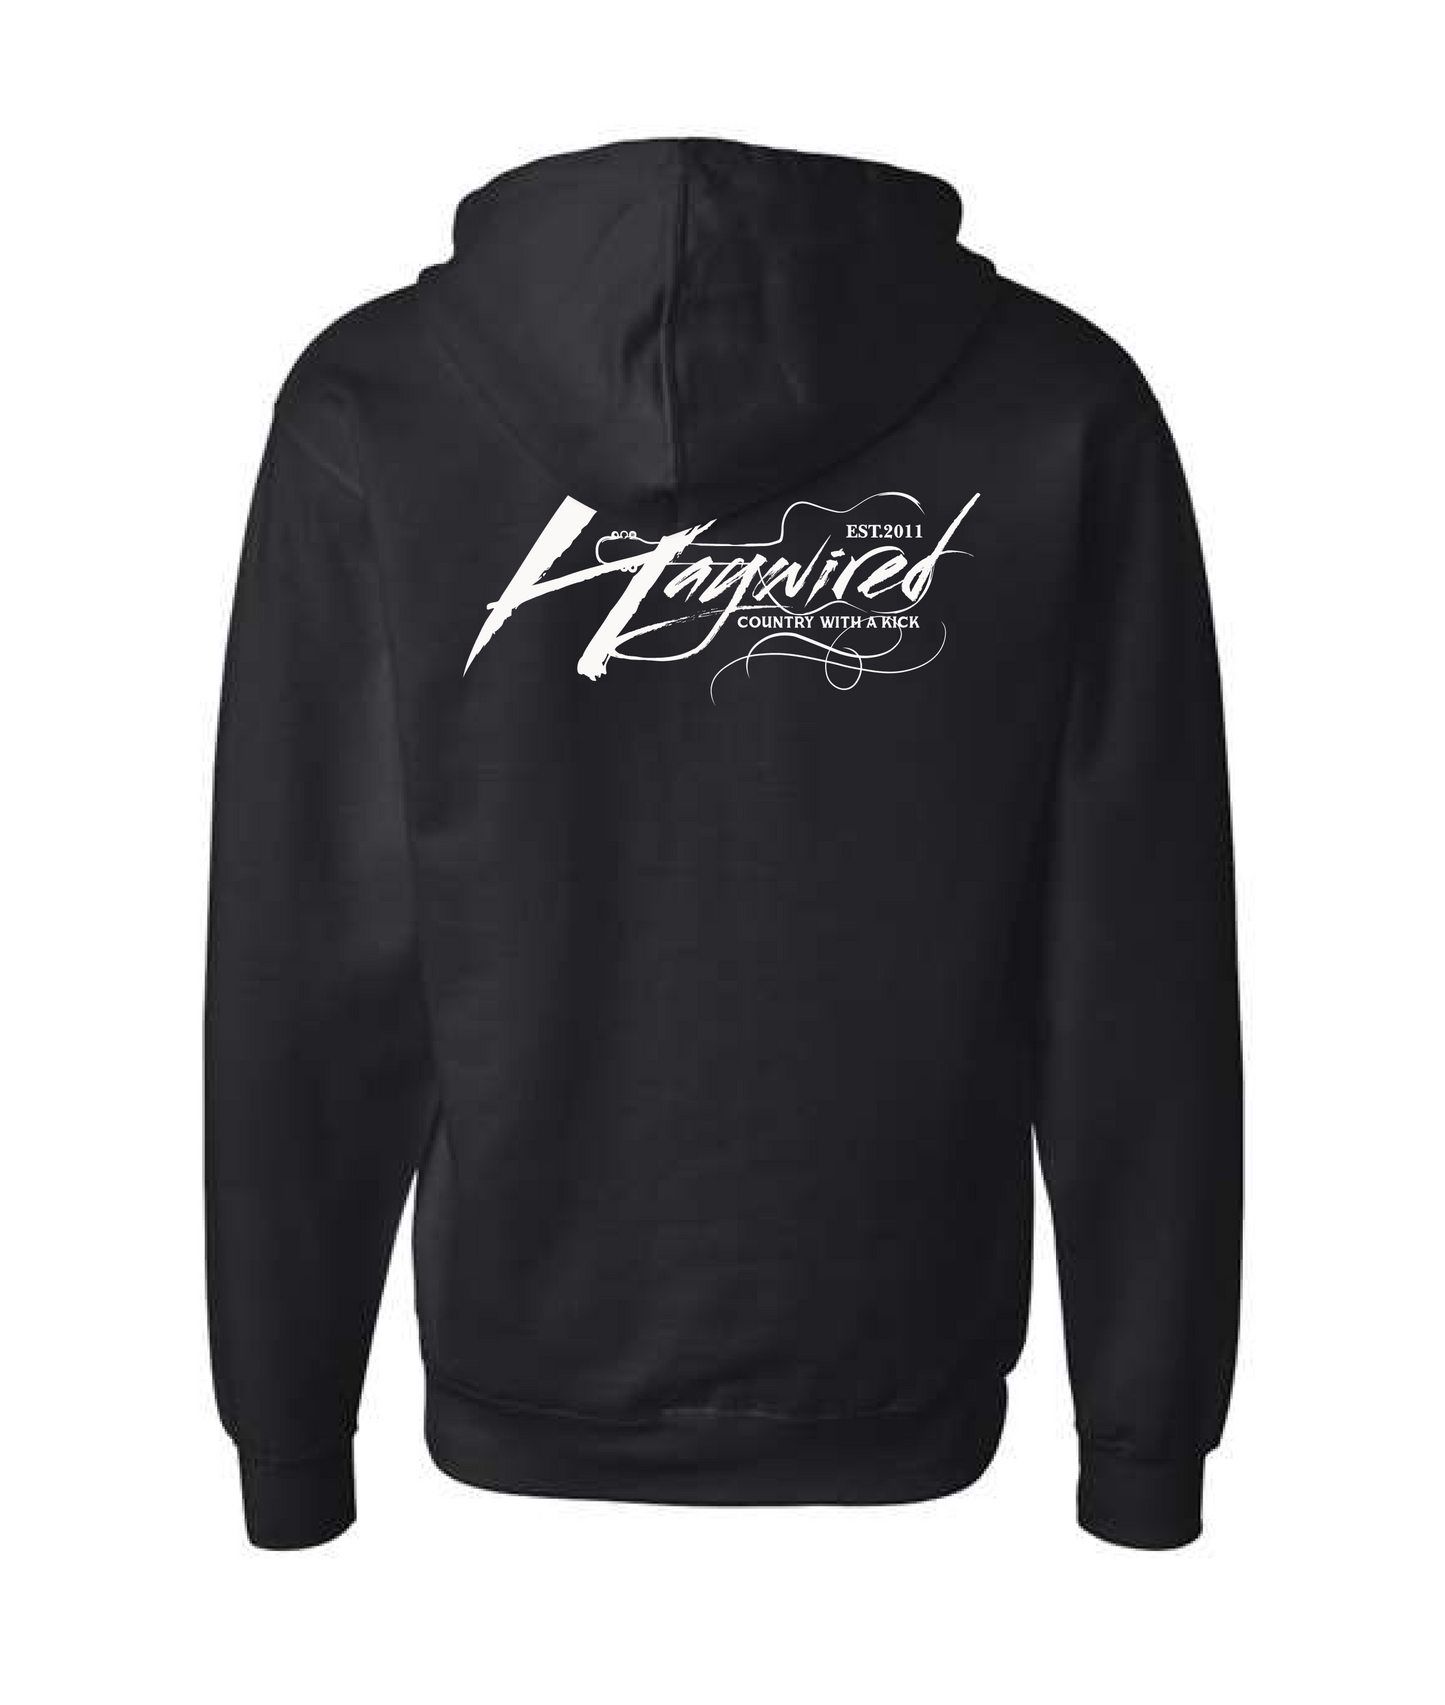 Haywired - Country With a Kick Logo - Black Zip Hoodie